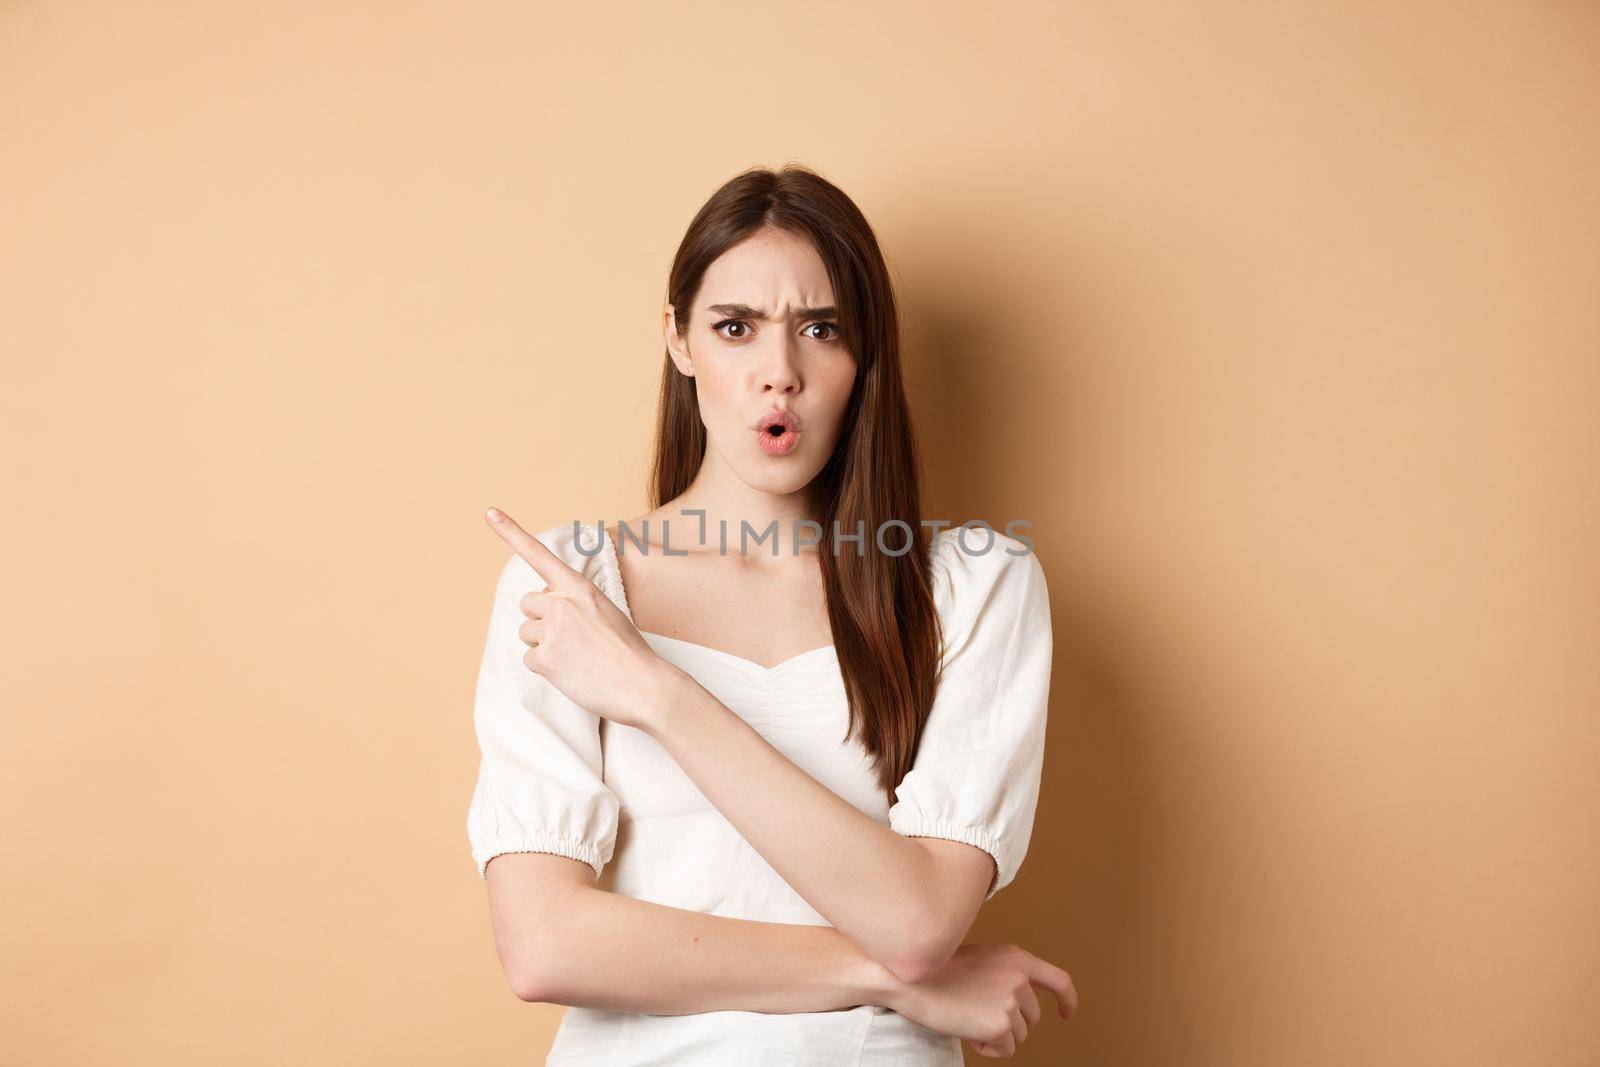 What is that. Shocked and angry woman scolding person, frowning and pointing left with confused face, waiting for explanation, standing on beige background.